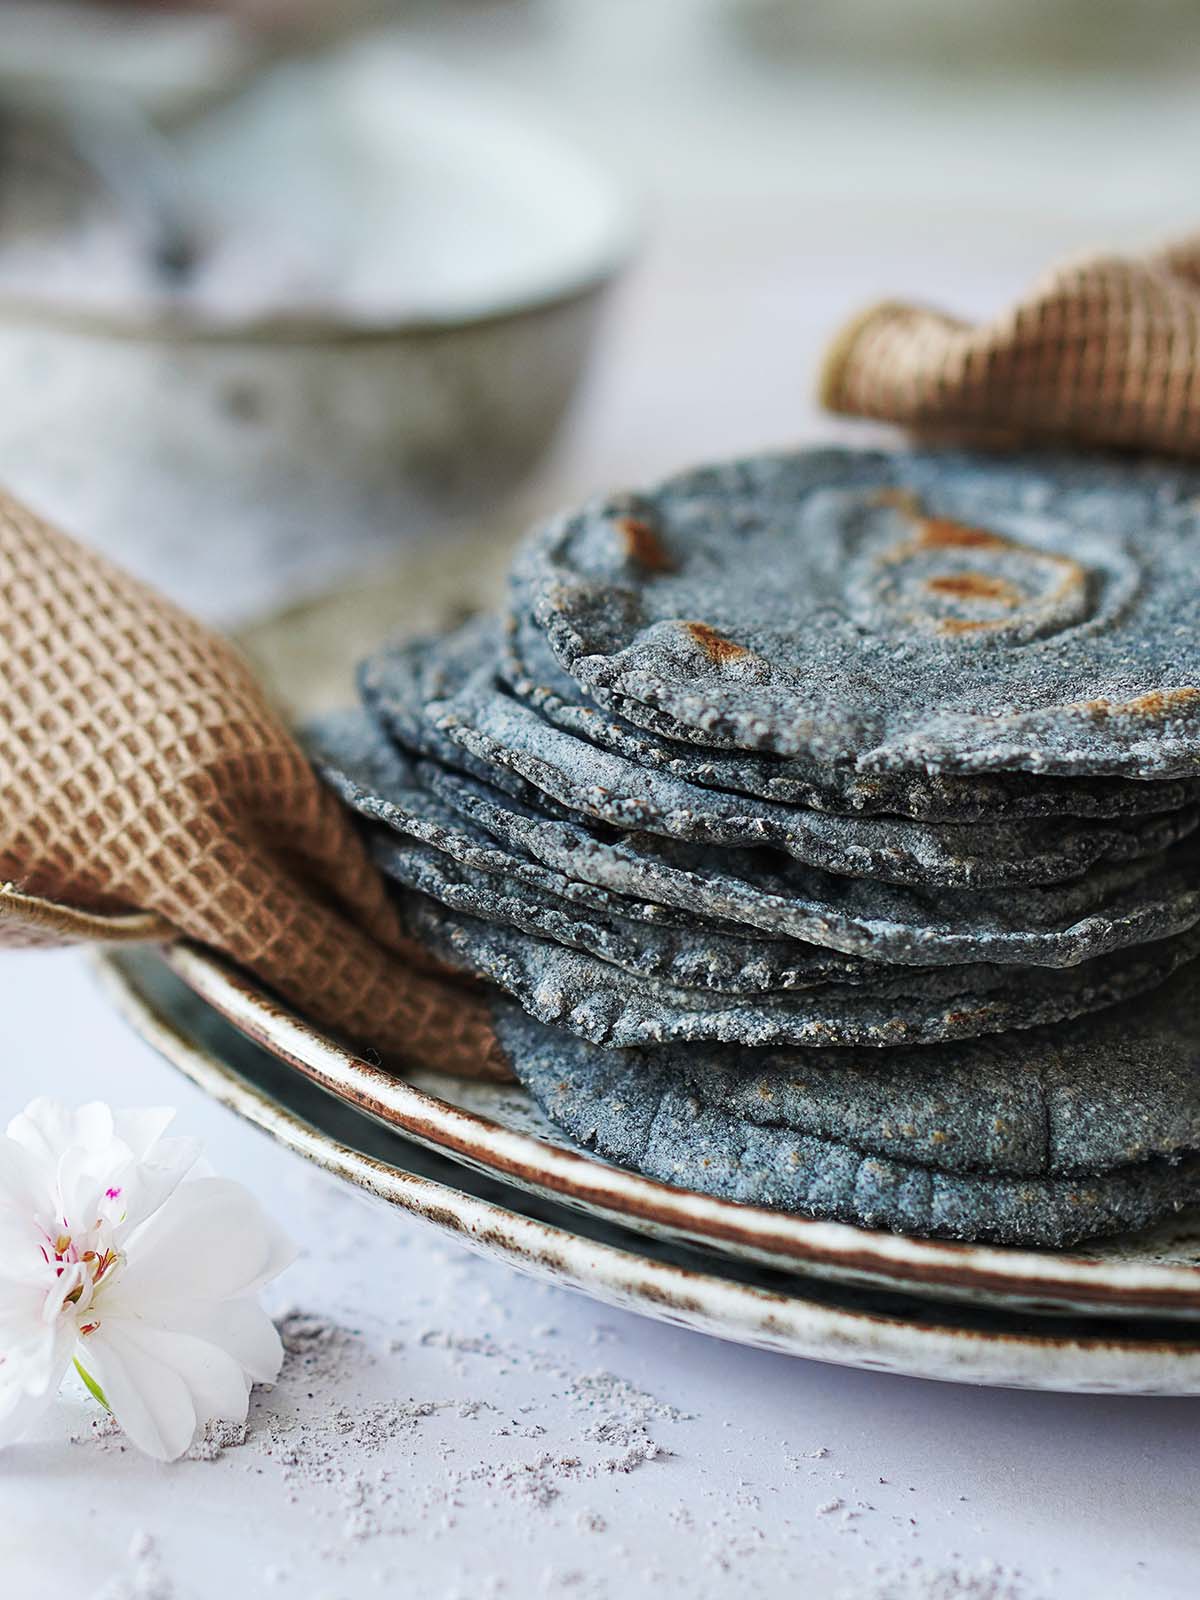 A stack of blue corn tortillas placed on a kitchen towel.